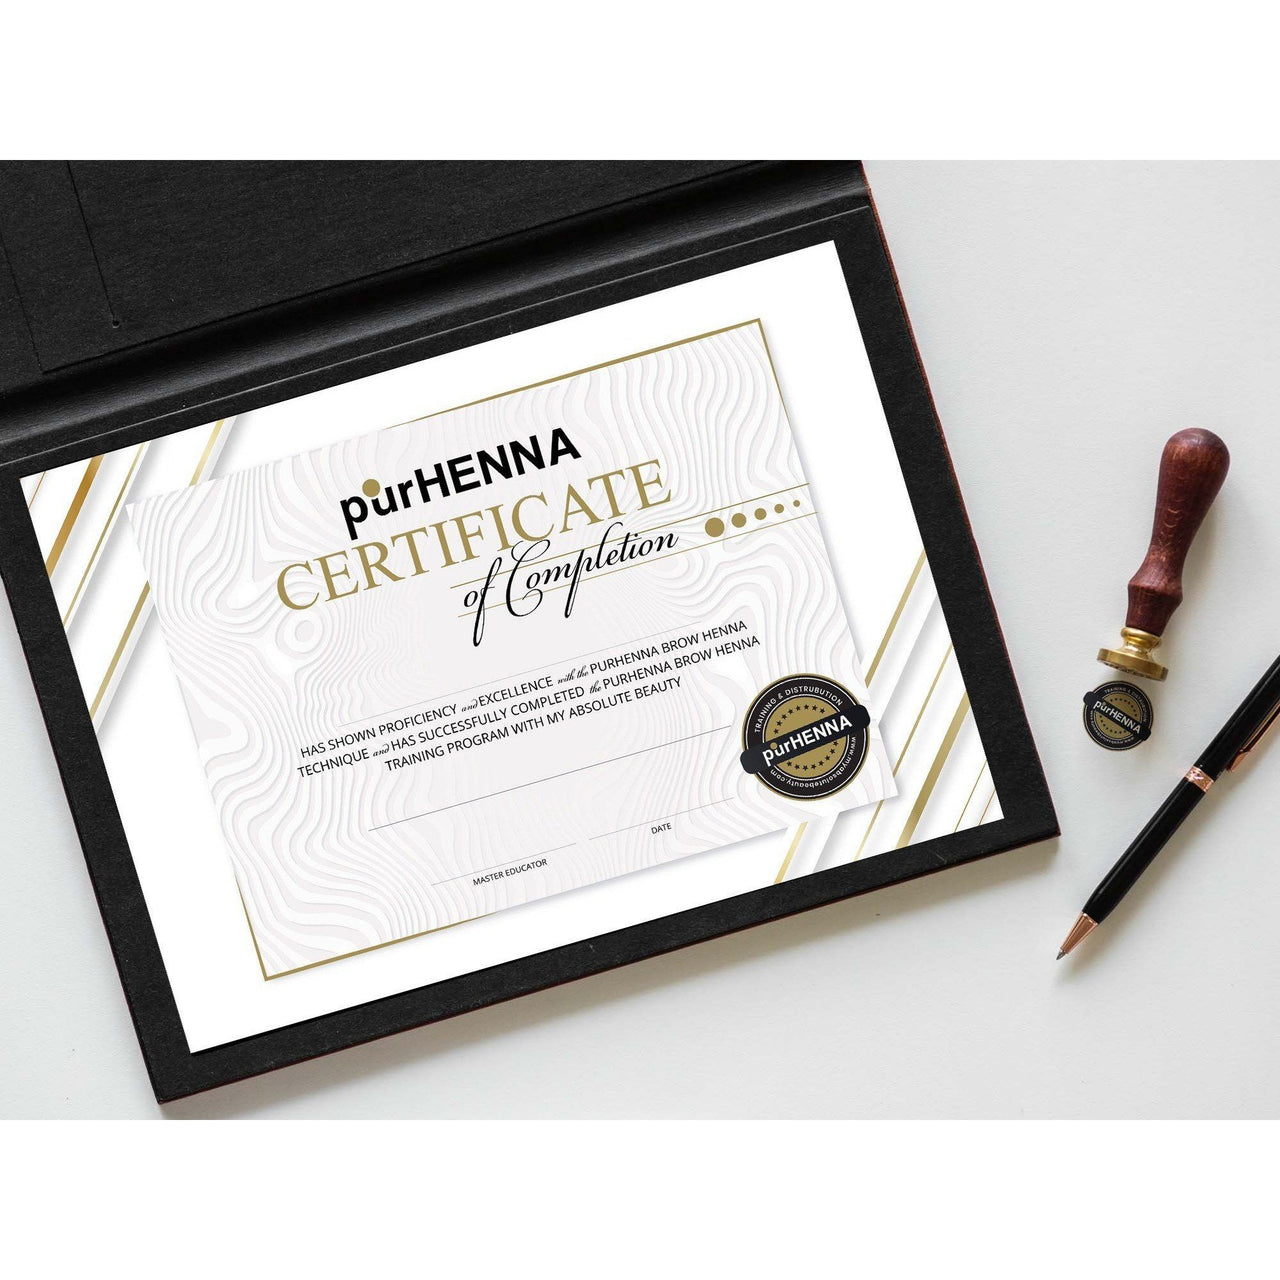 purHENNA® | Brow Henna | CERTIFICATE of Completion